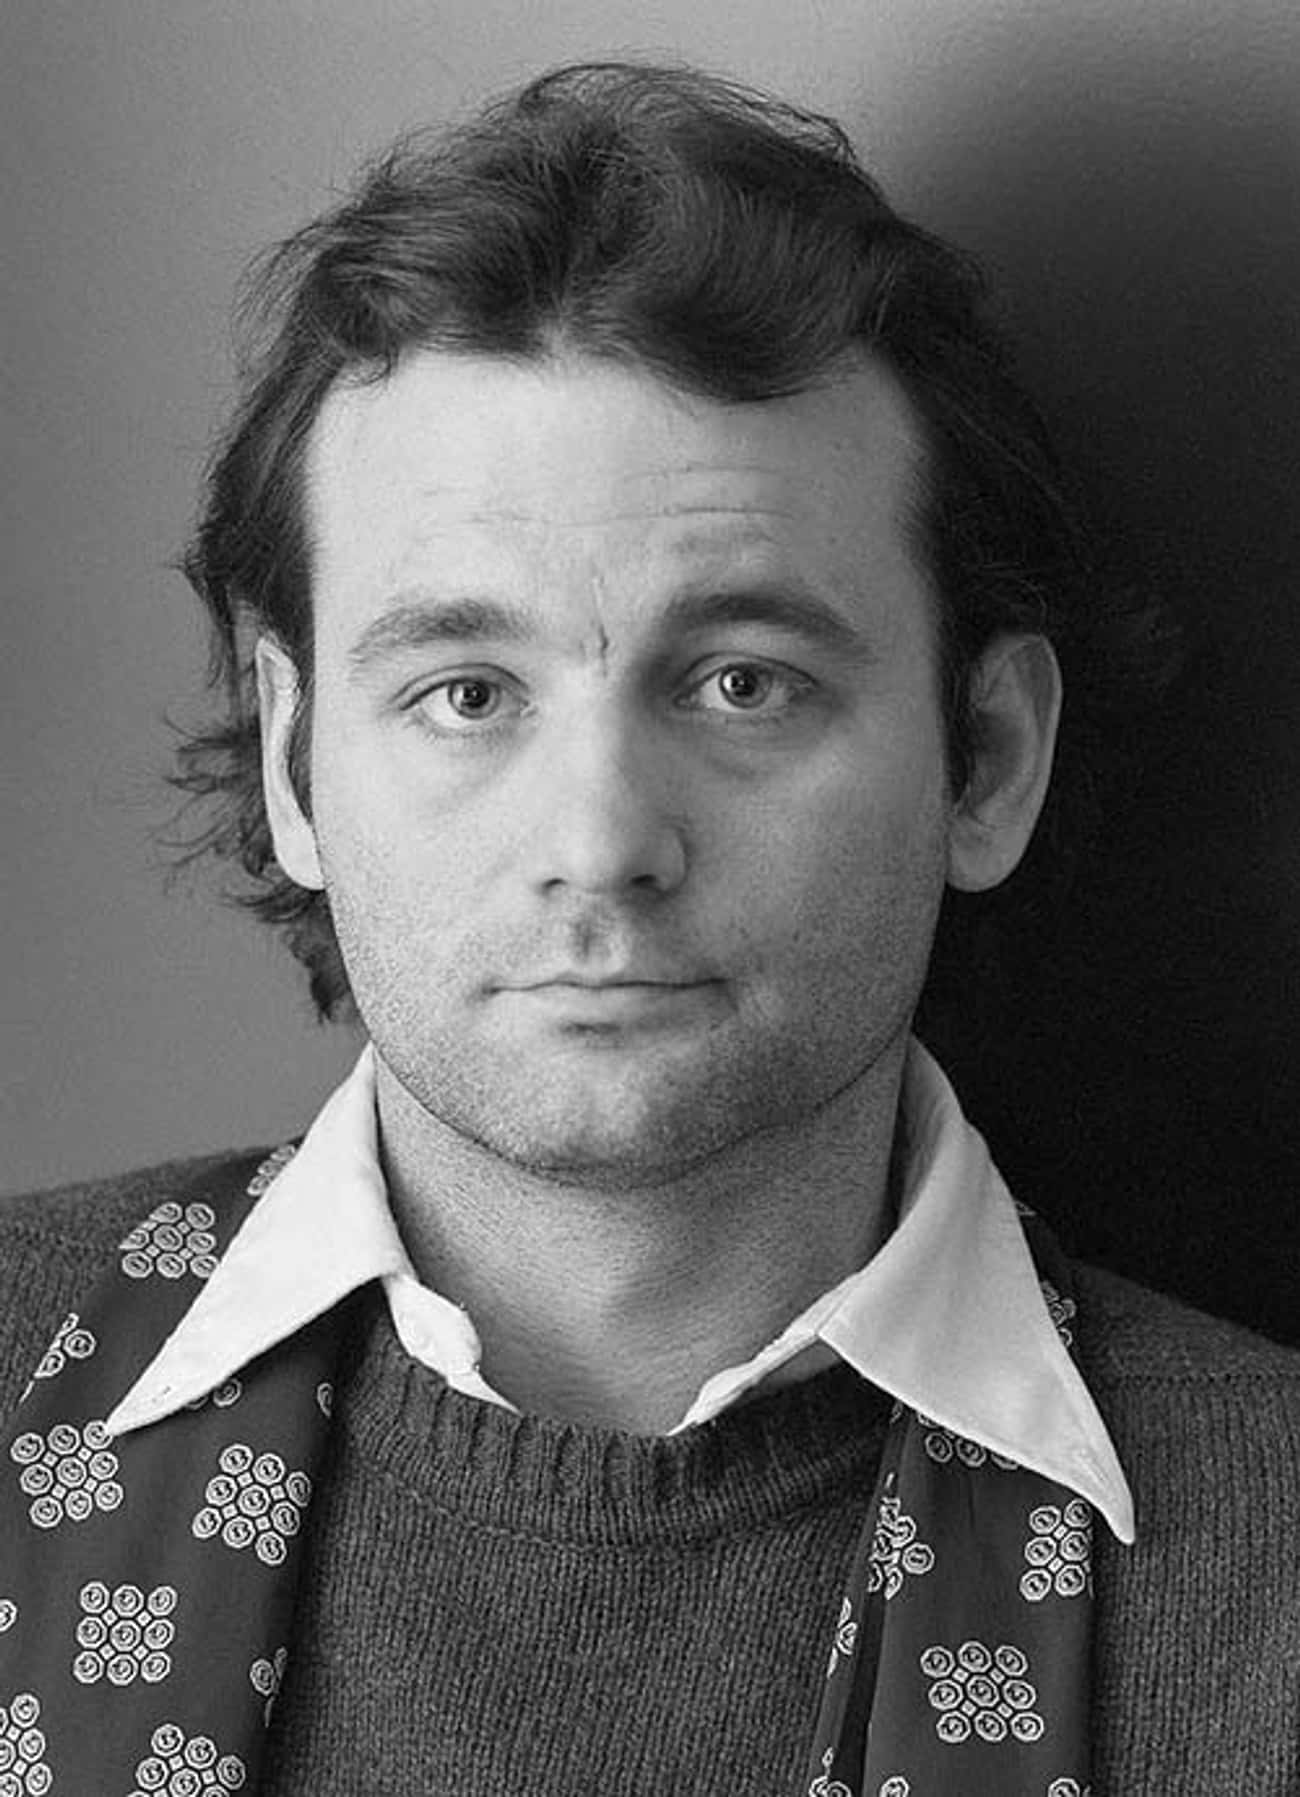 Young Bill Murray in a Sweater and Patterned Vest